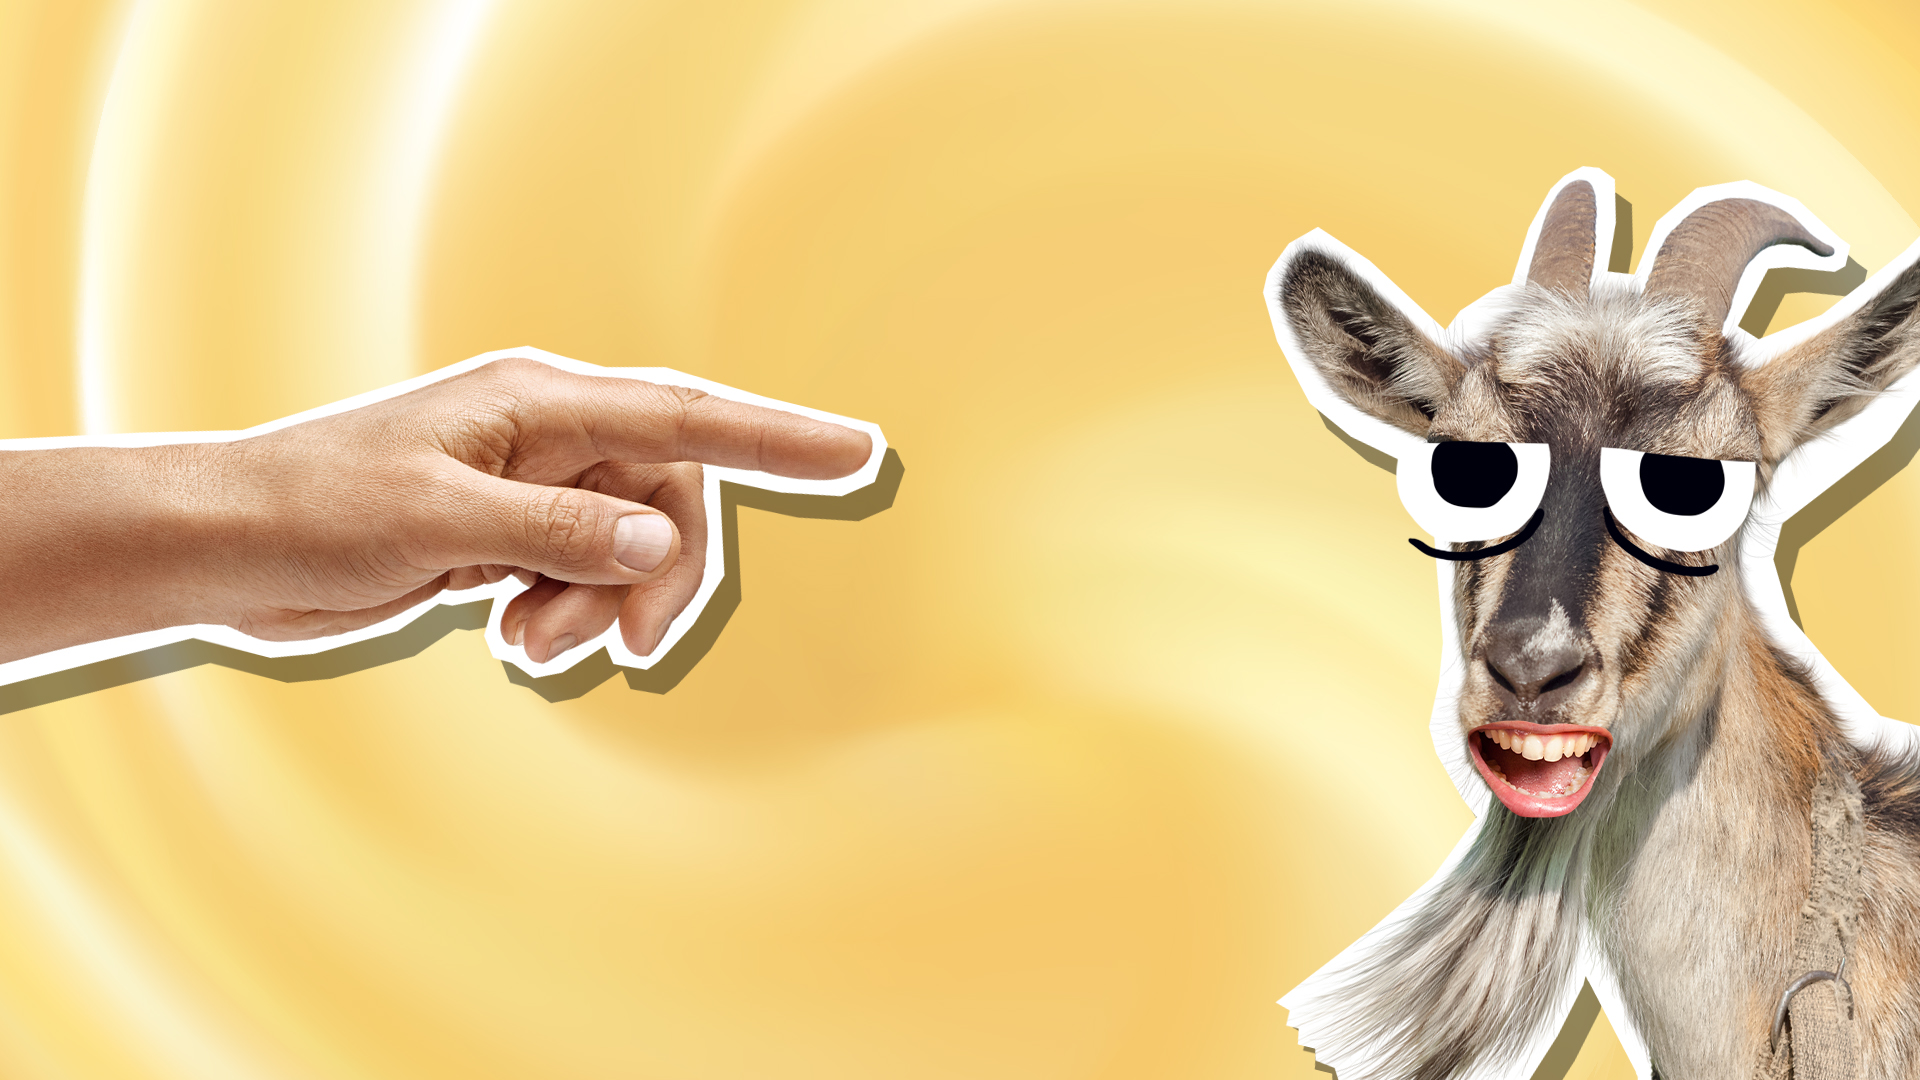 A hand pointing at a goat